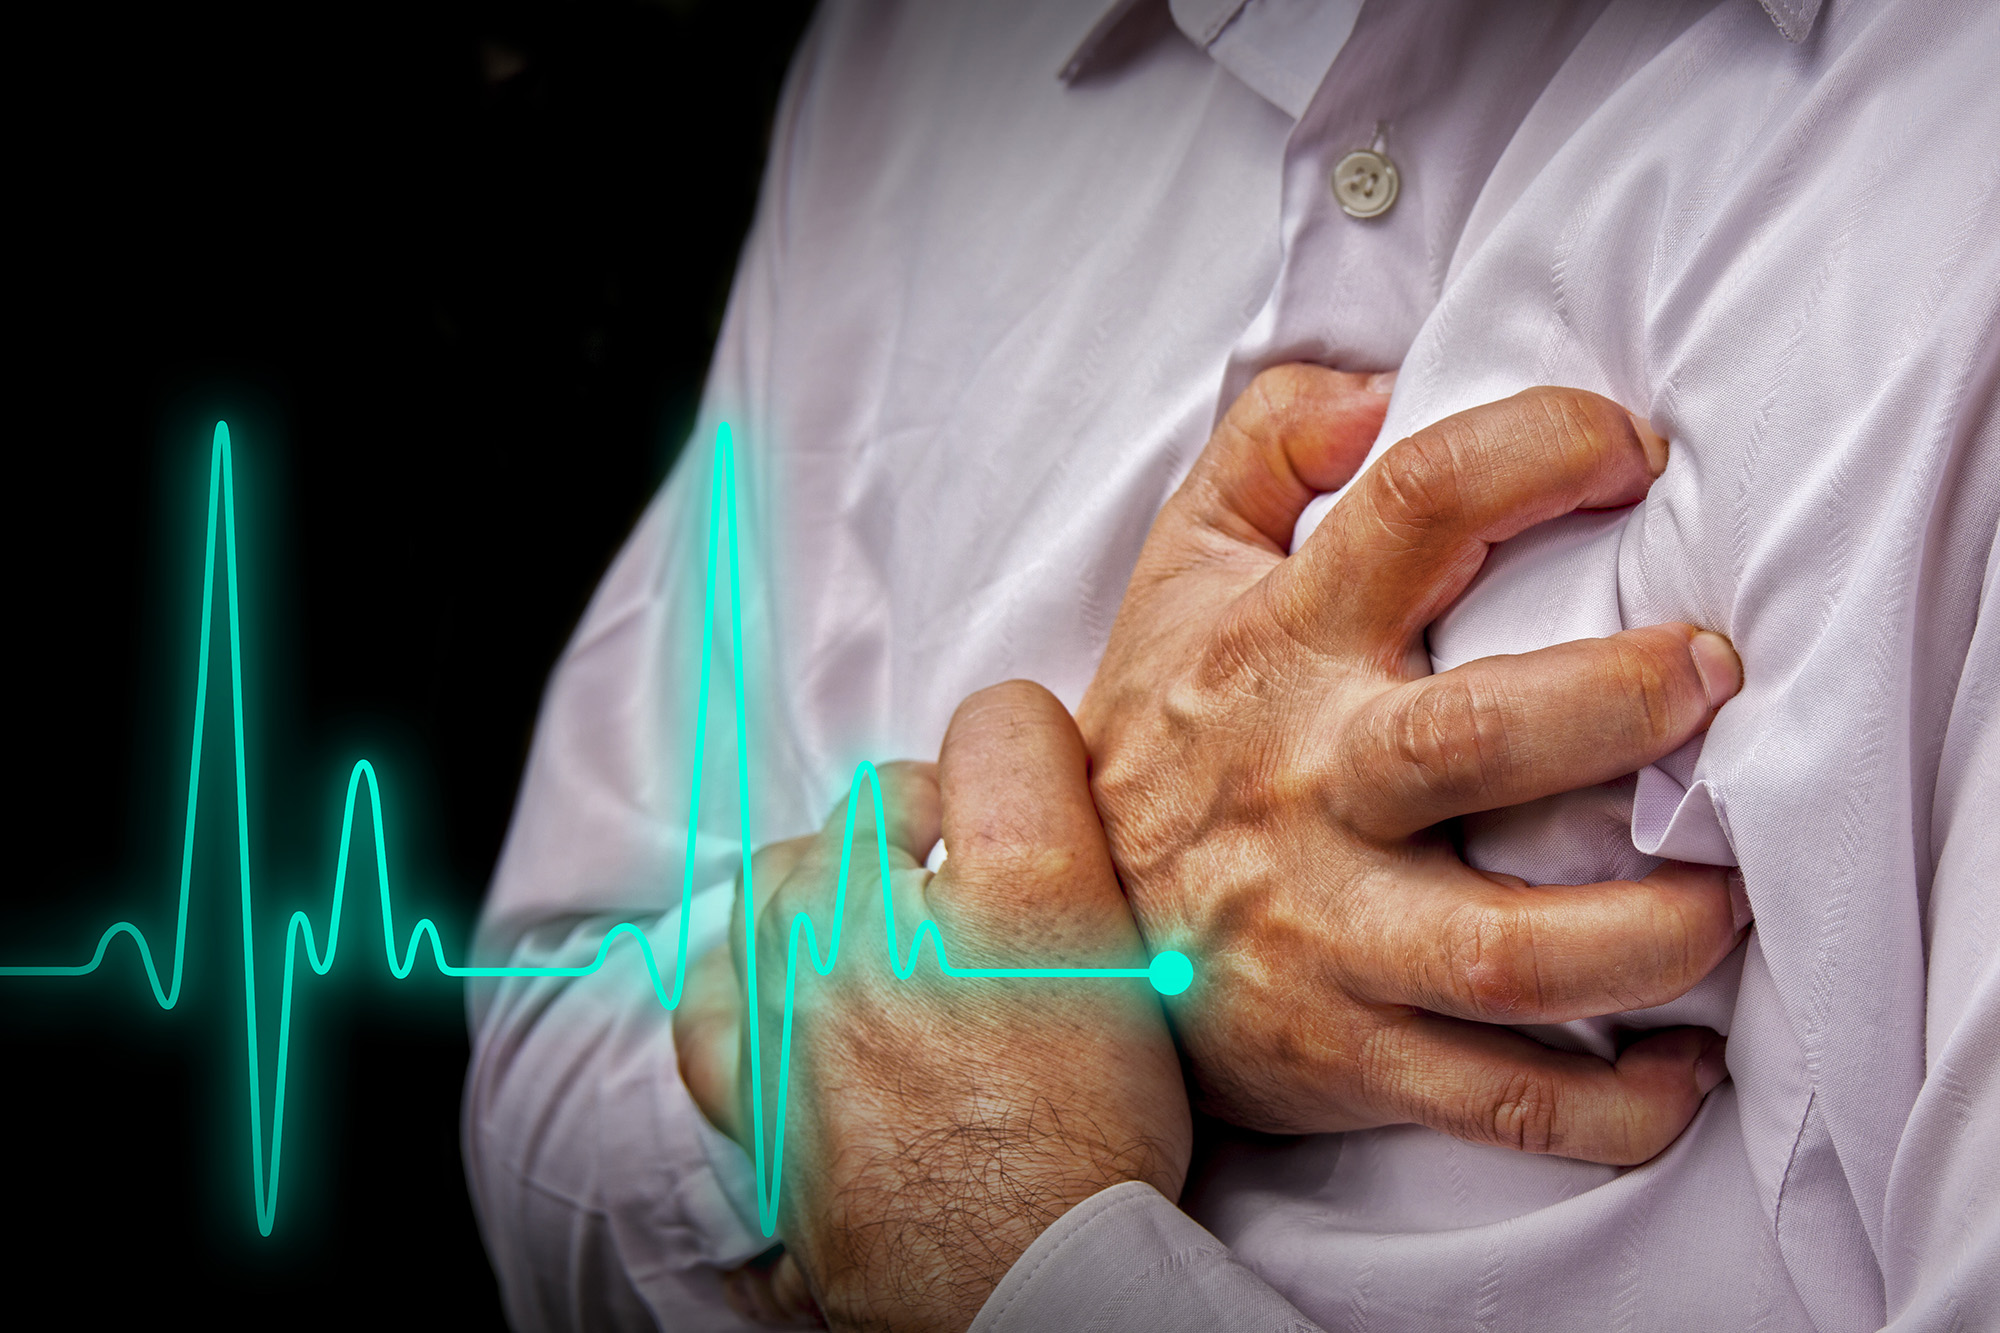 Men with chest pain – heart attack